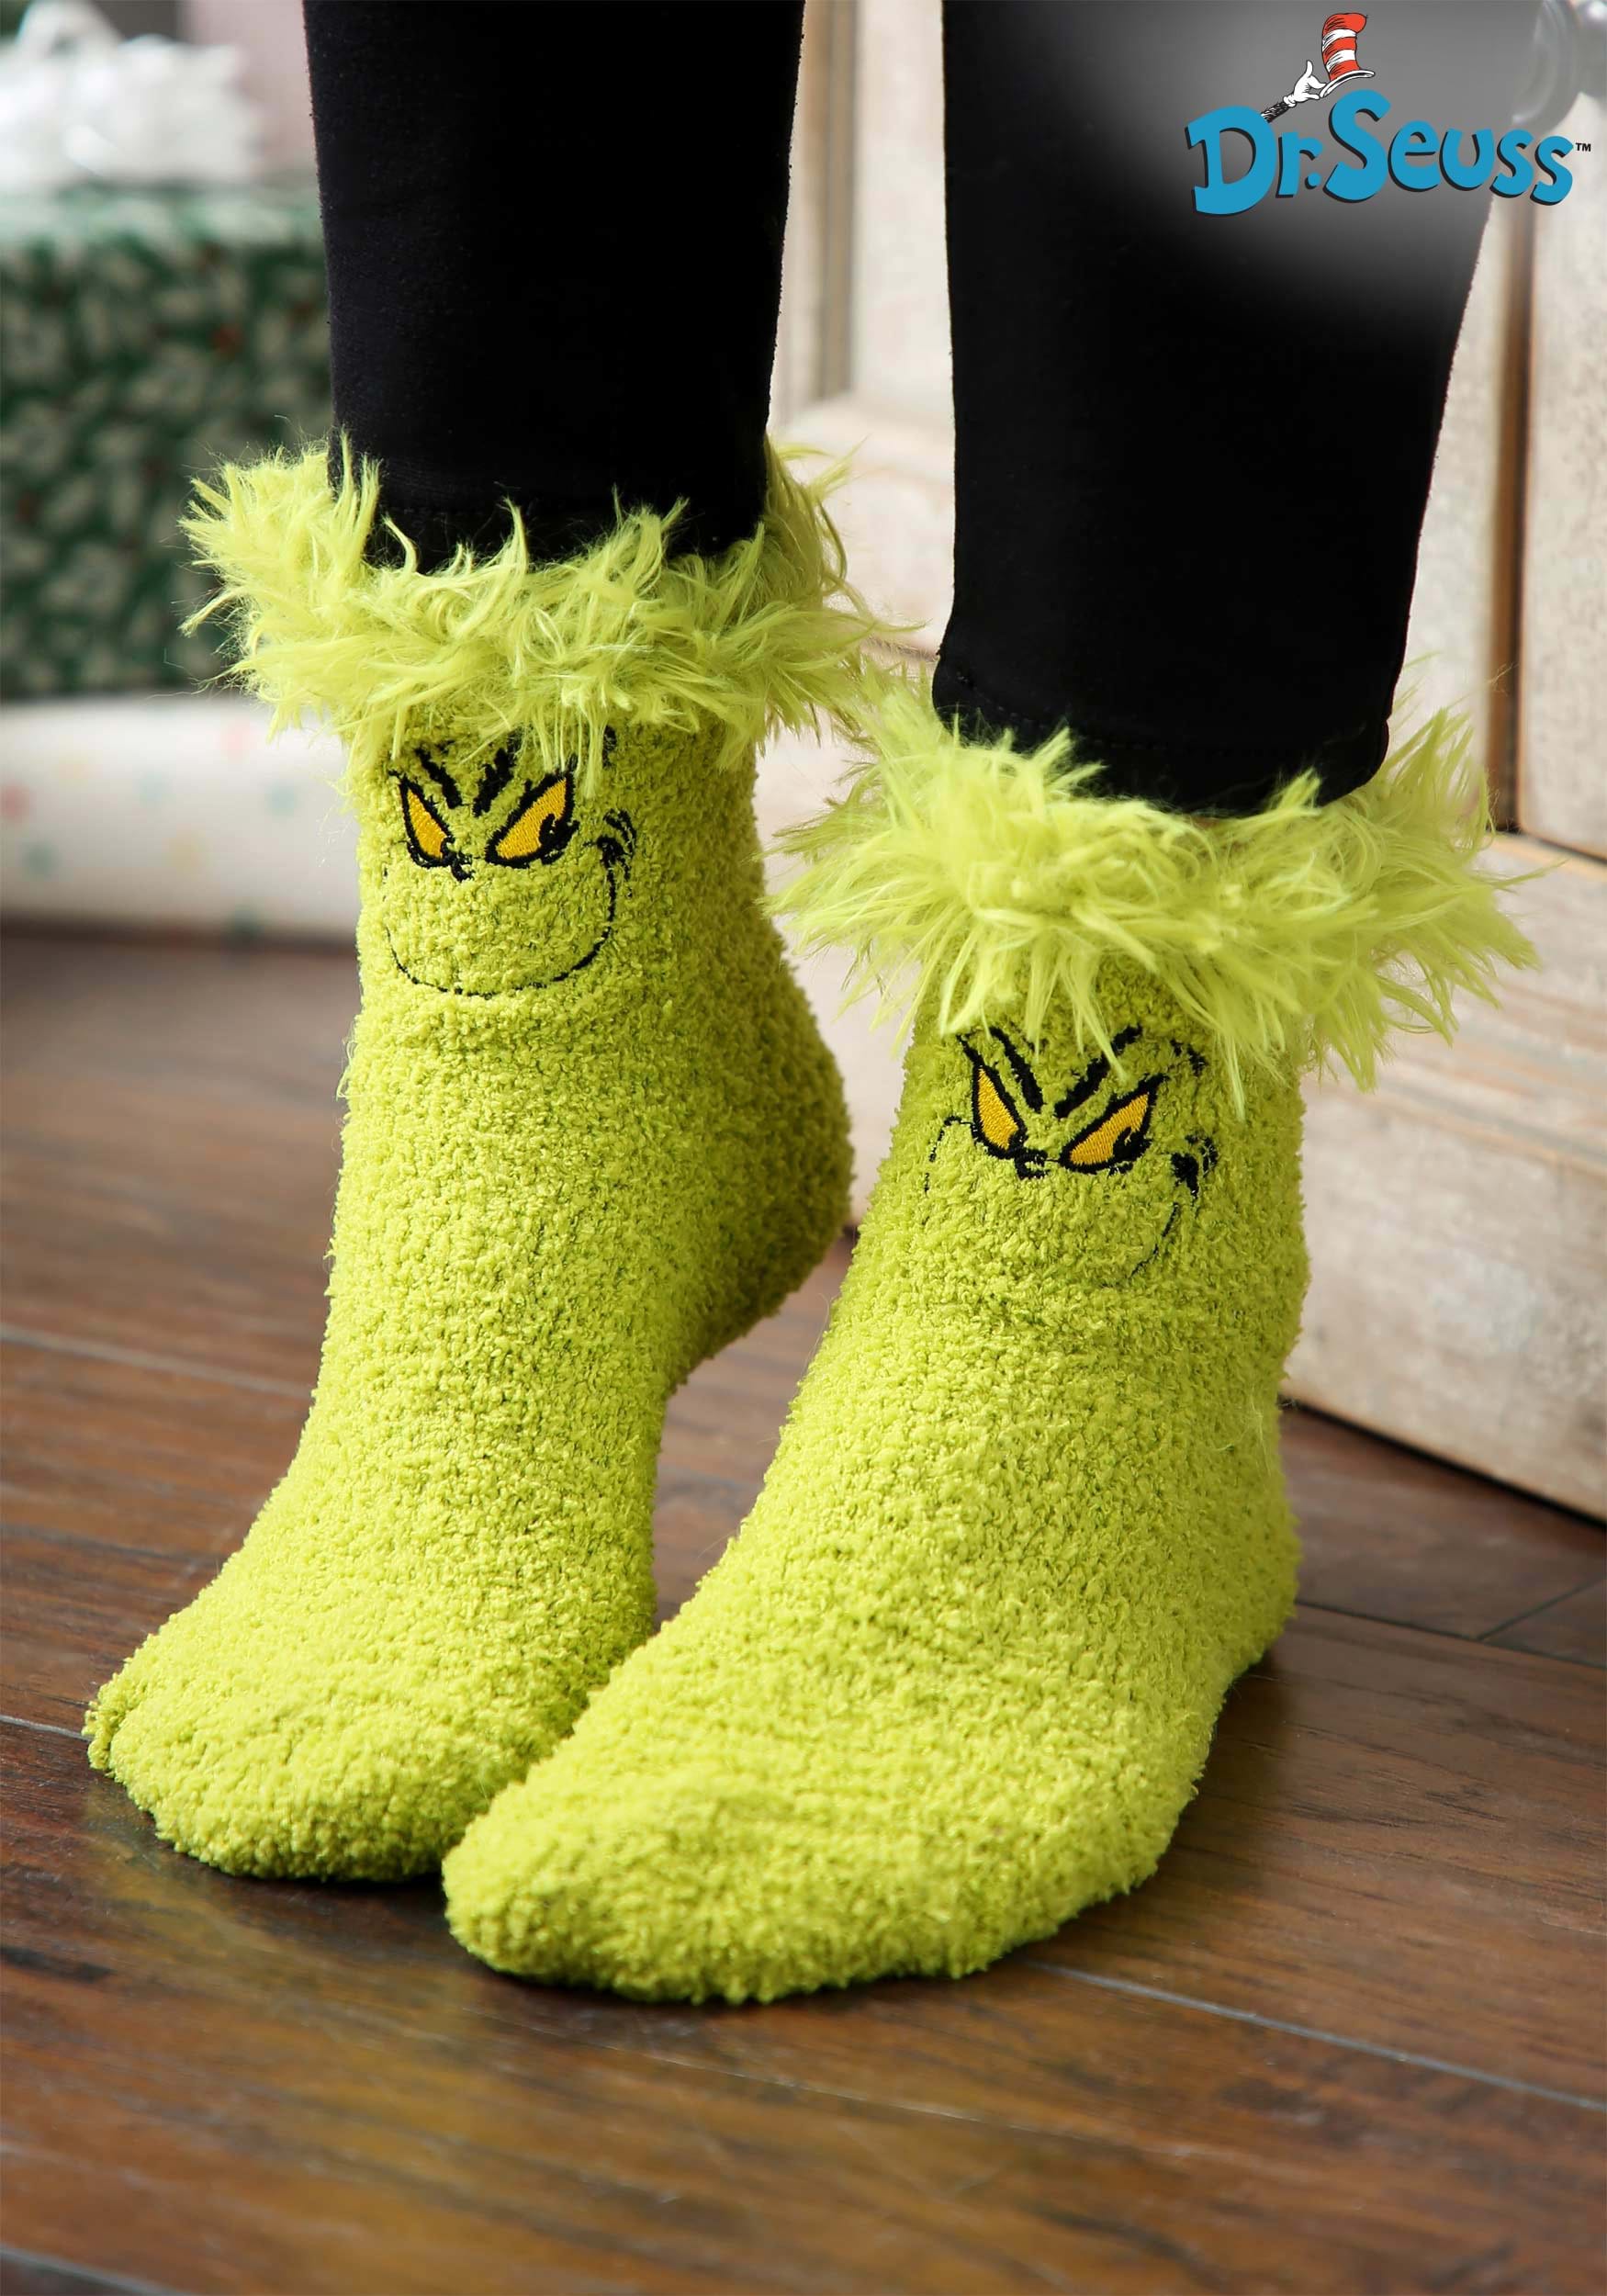 https://images.fun.com/products/74252/1-1/grinch-fuzzy-socks.jpg